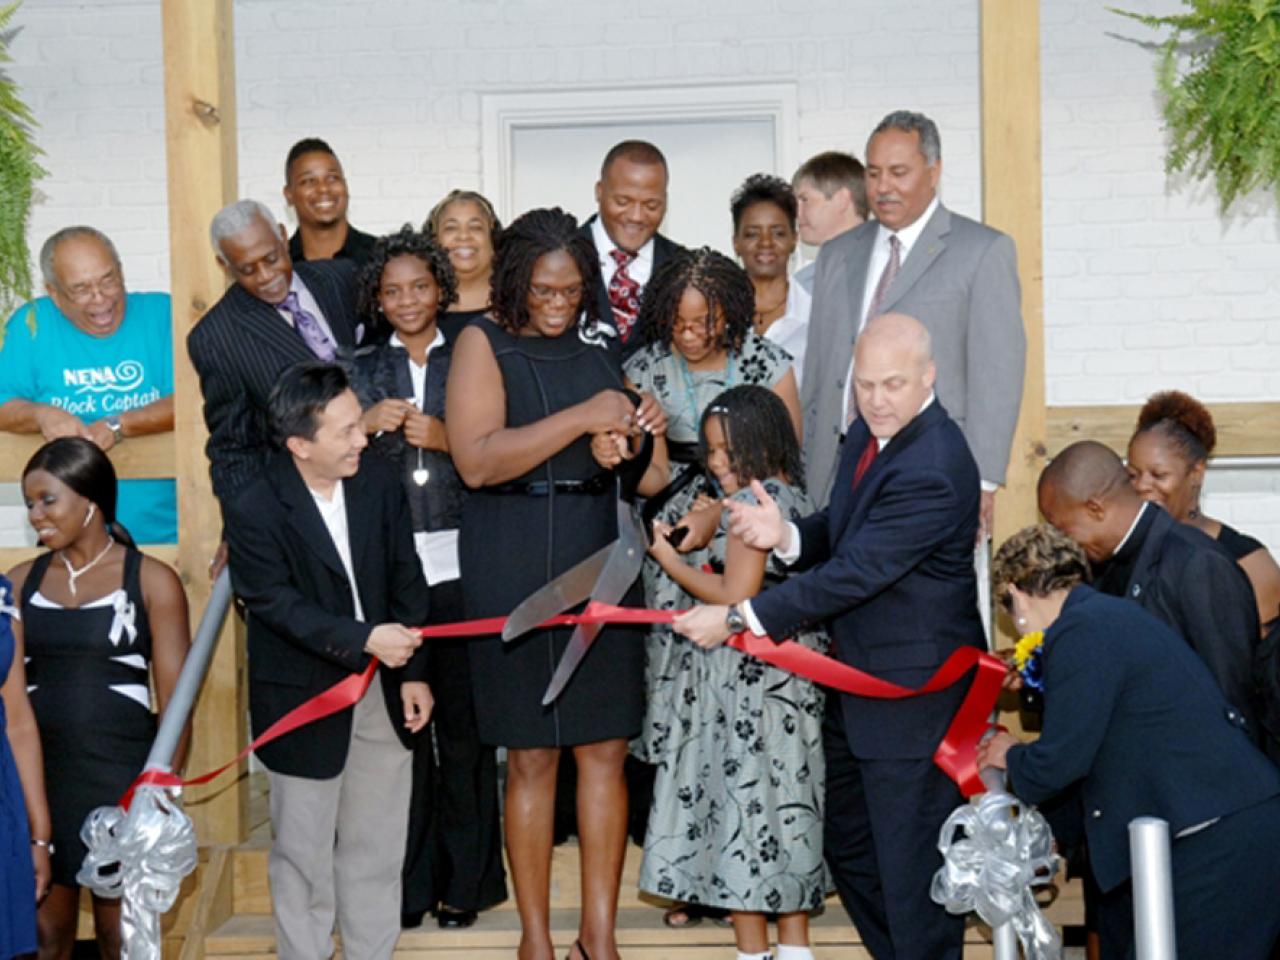 A group of mostly African-Americans of various ages gather on a stairway outside a building while two people hold scissors and are about to cut a red ribbon.